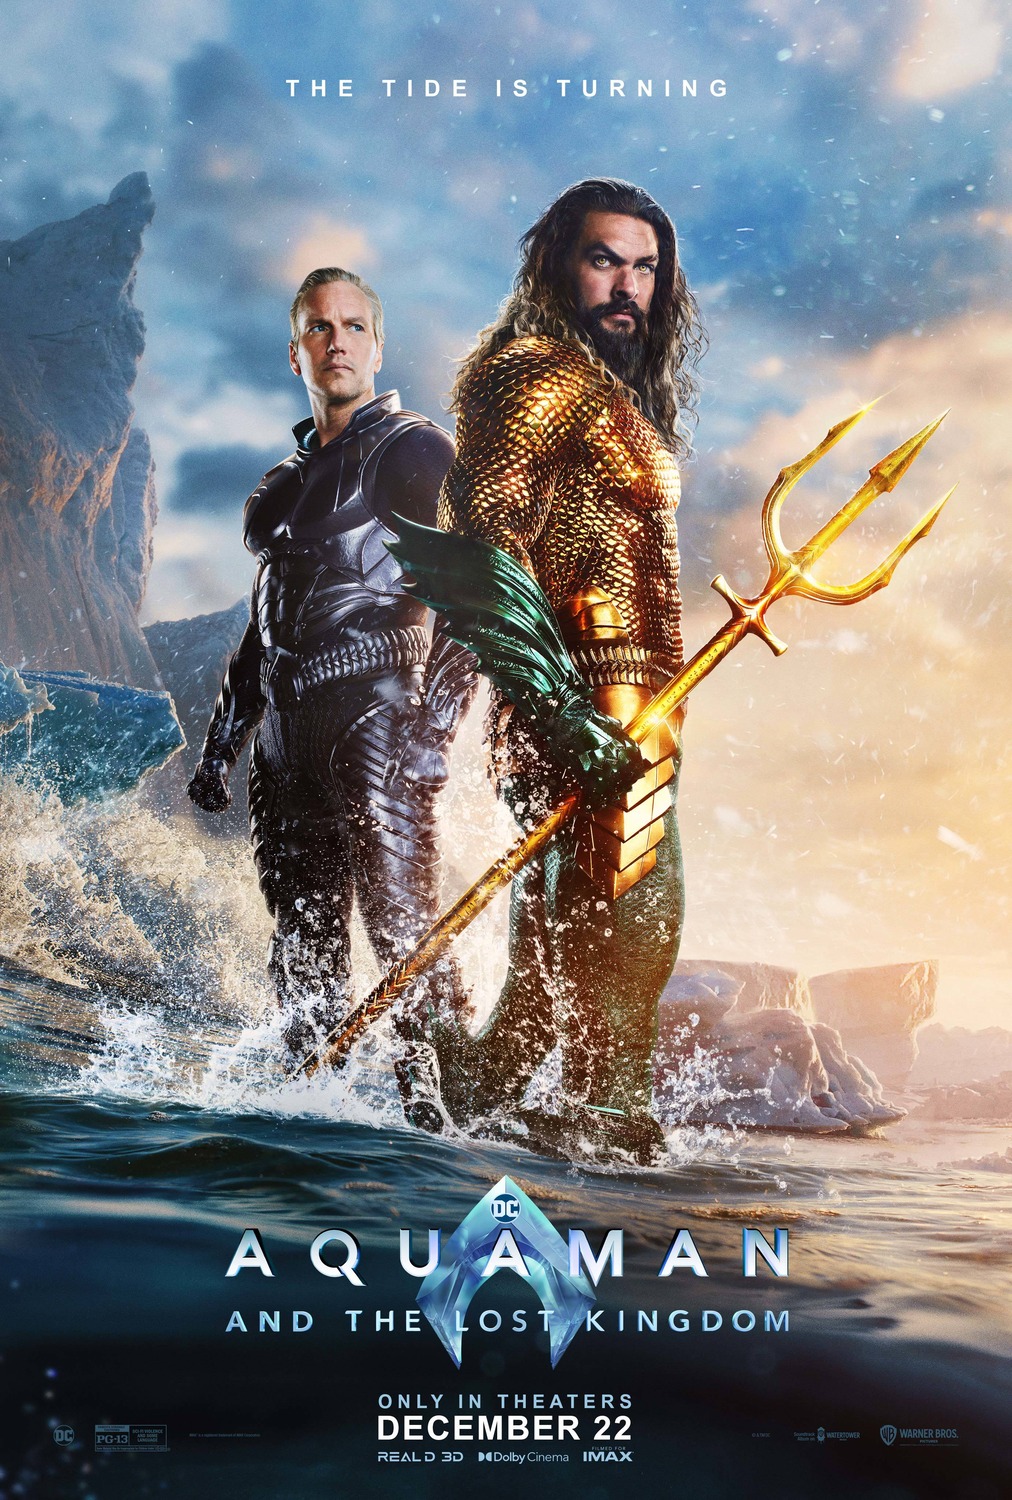 Aquaman stands defiantly, trident in hand, with his half-brother Orm behind him.